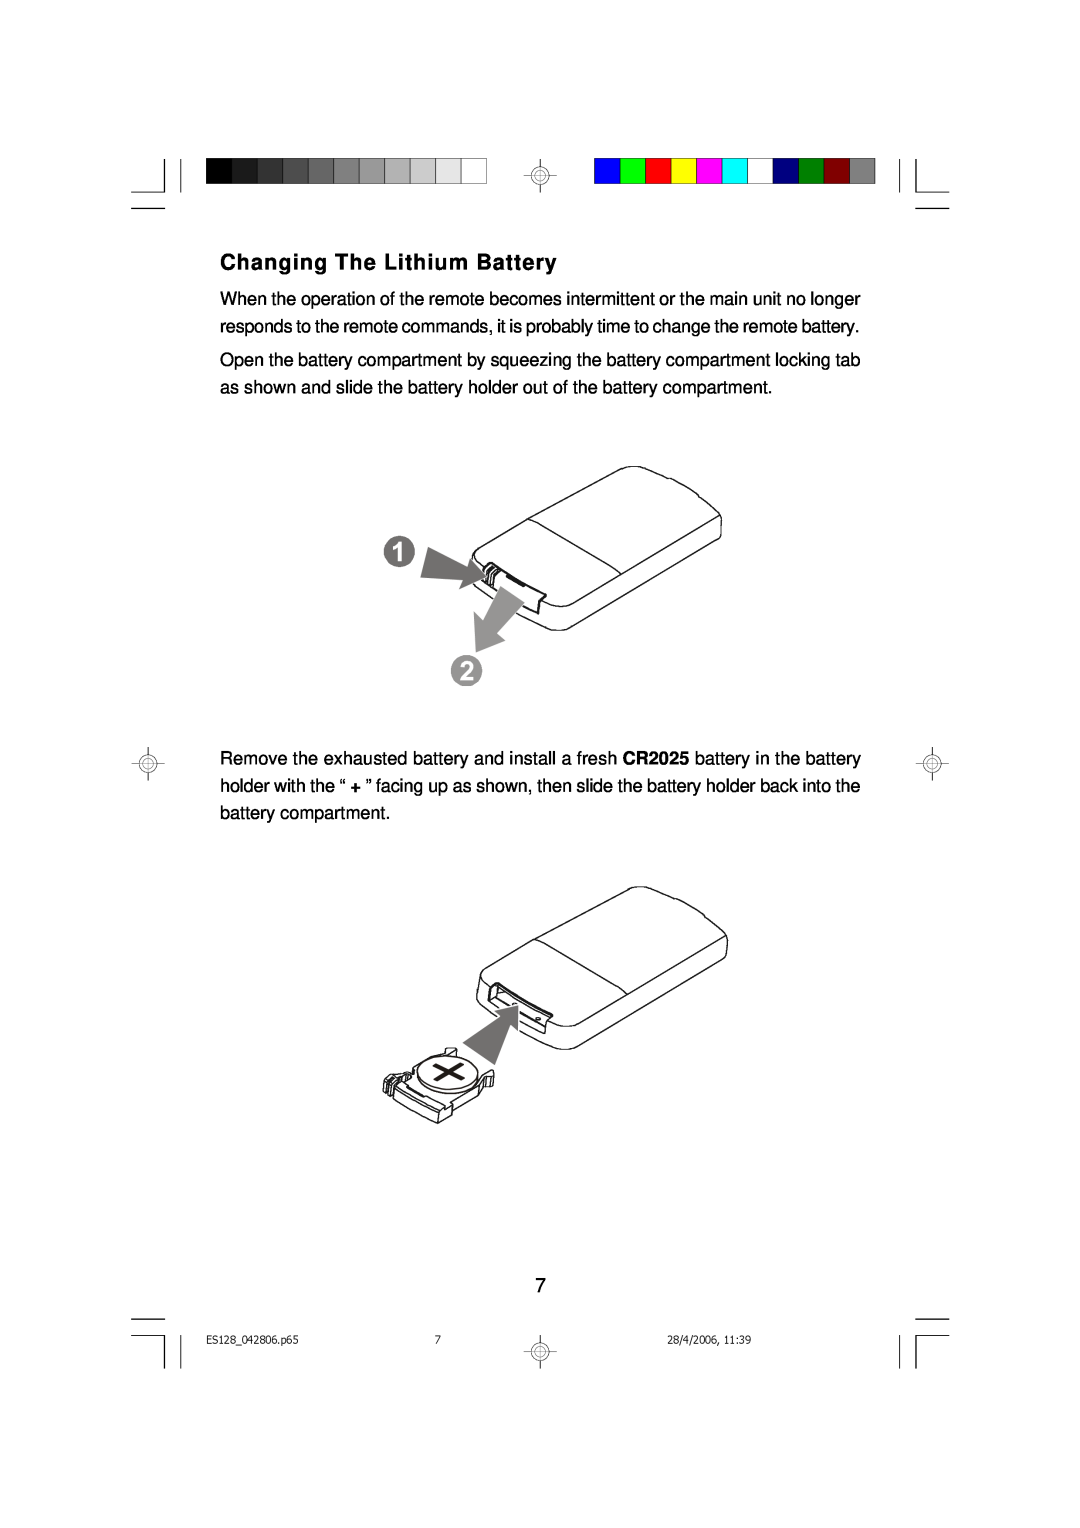 Emerson owner manual Changing The Lithium Battery, ES128 042806.p65, 28/4/2006 